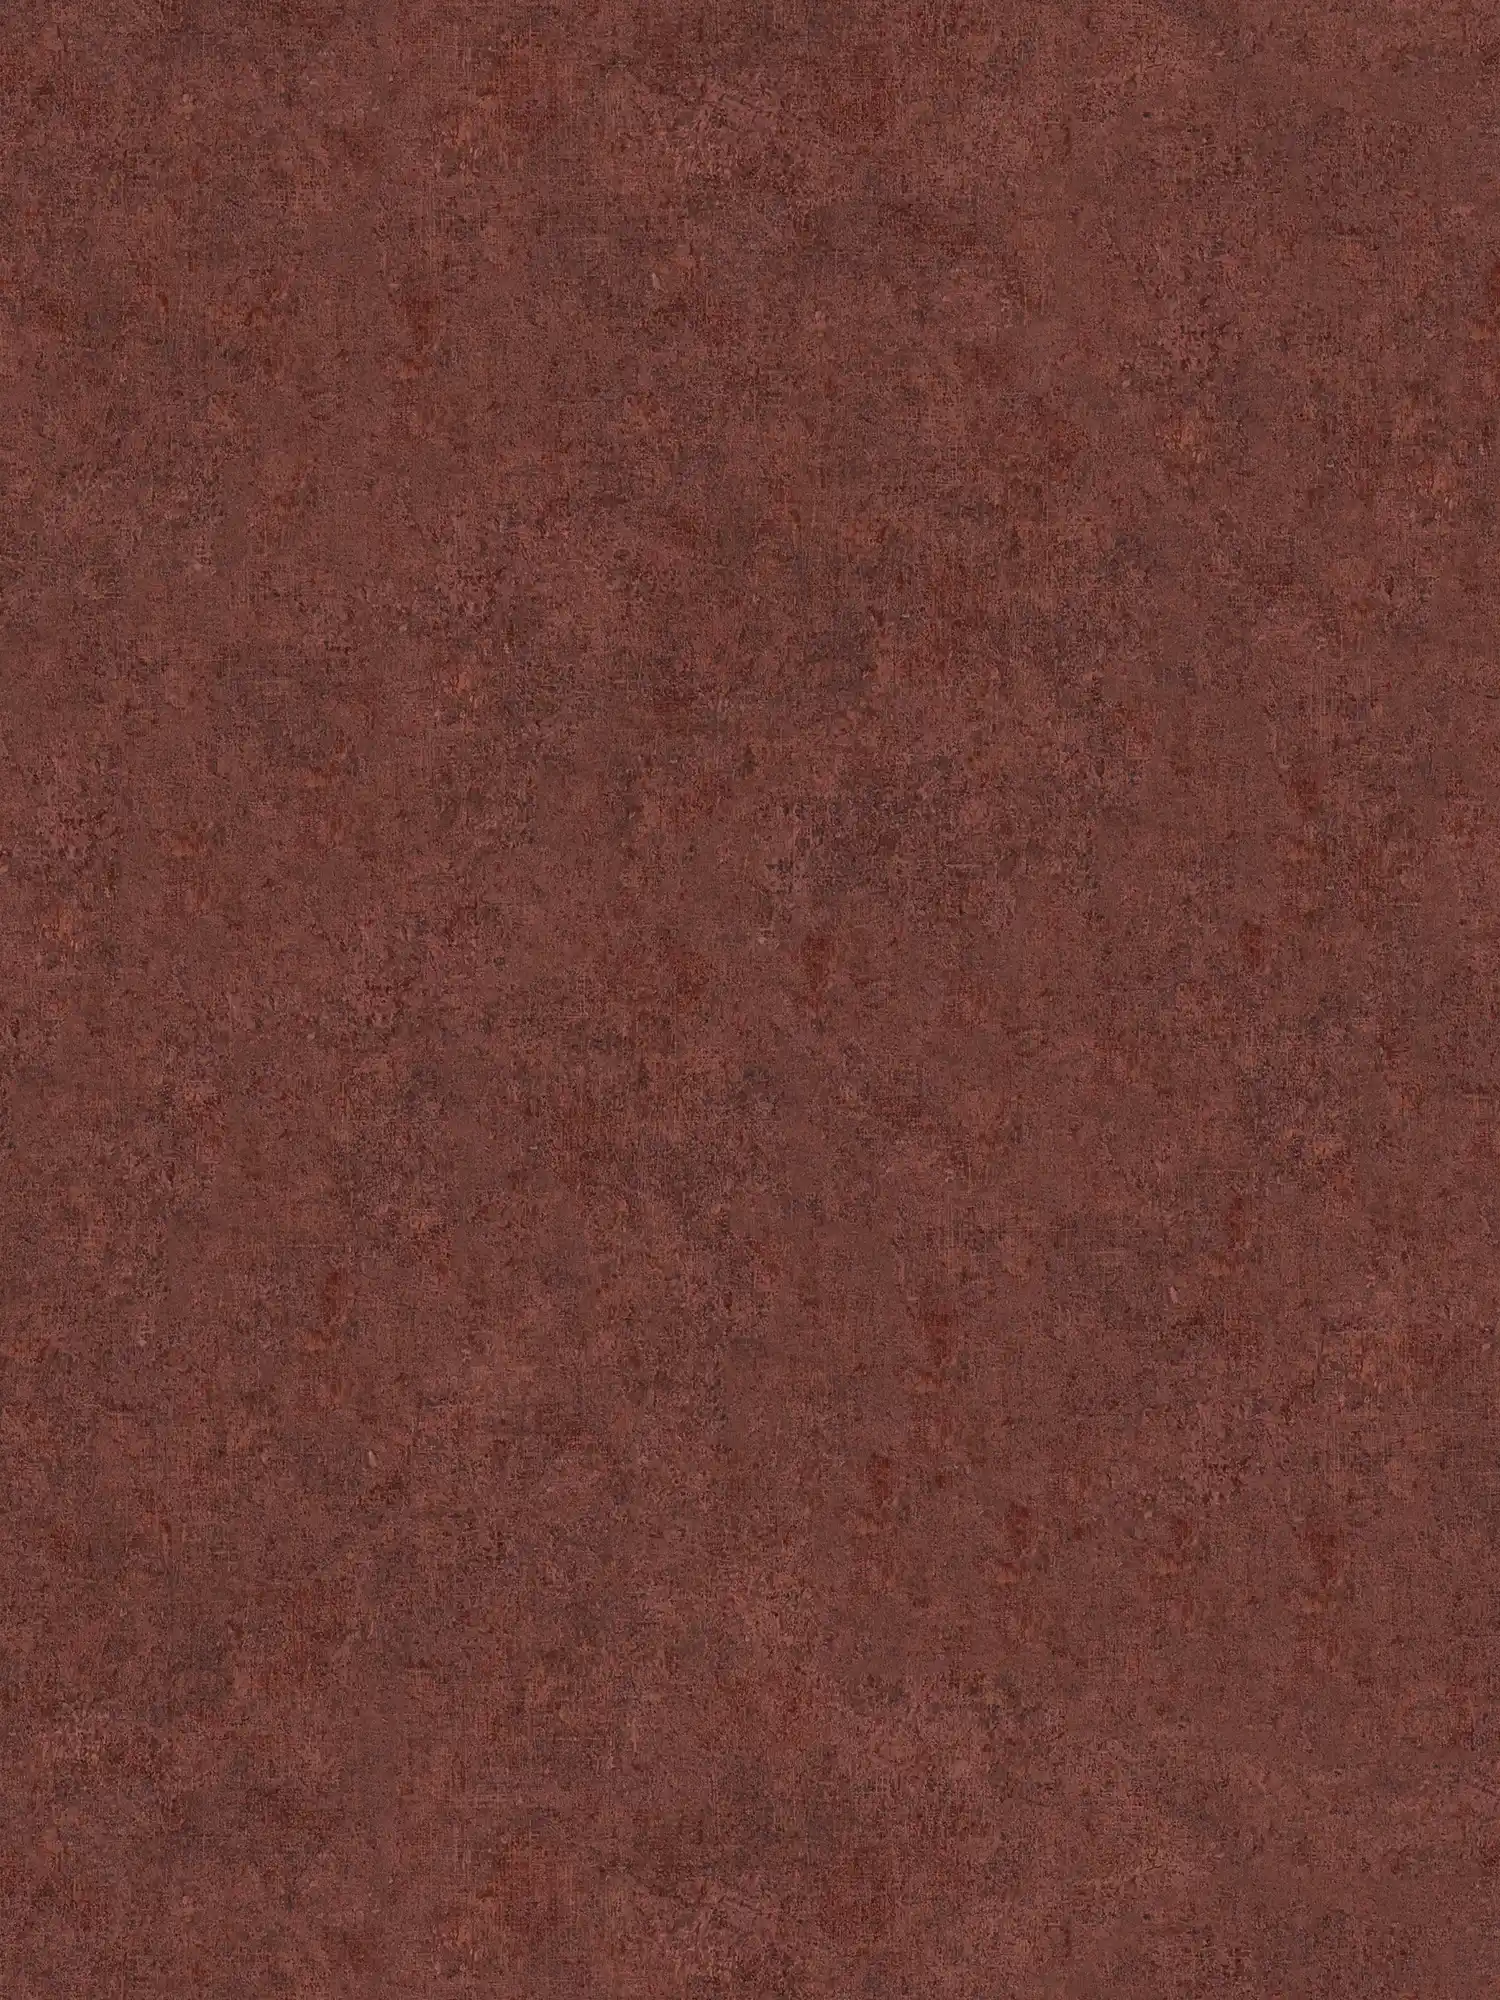 Non-woven wallpaper plains with colour pattern & vintage look - red
